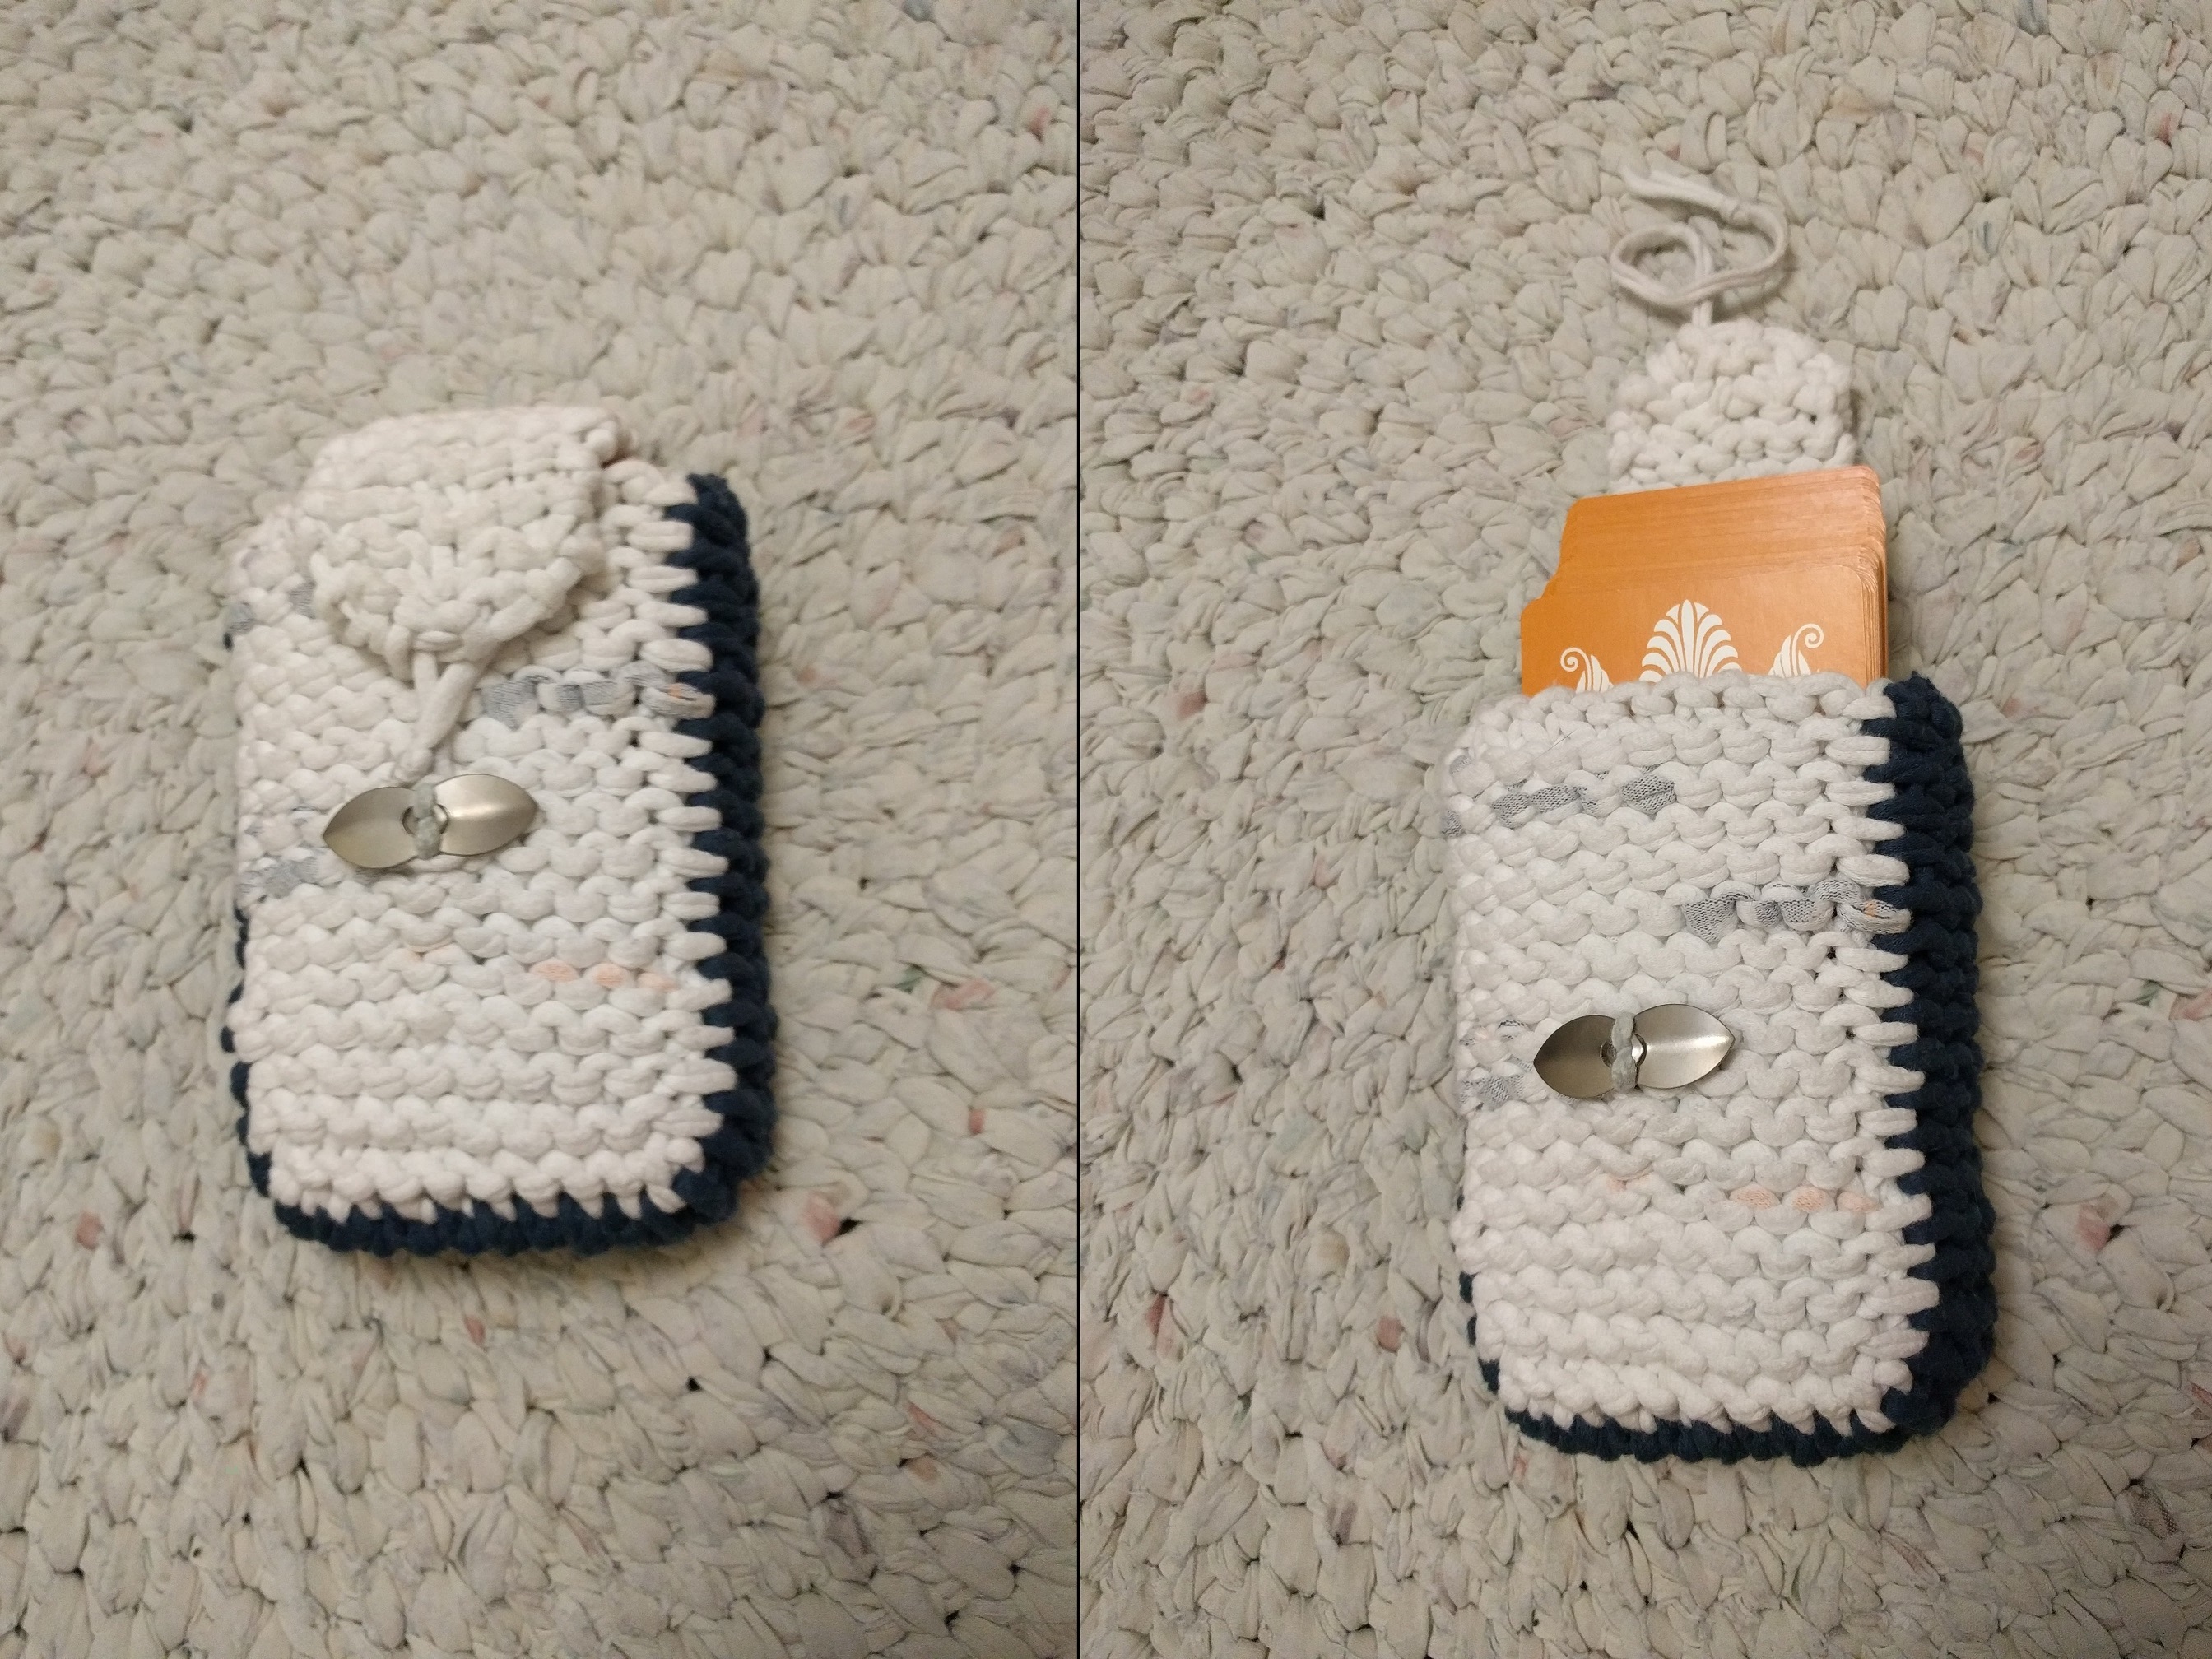 Two pics of the tarot cozy, one closed and one with orange cards sticking out